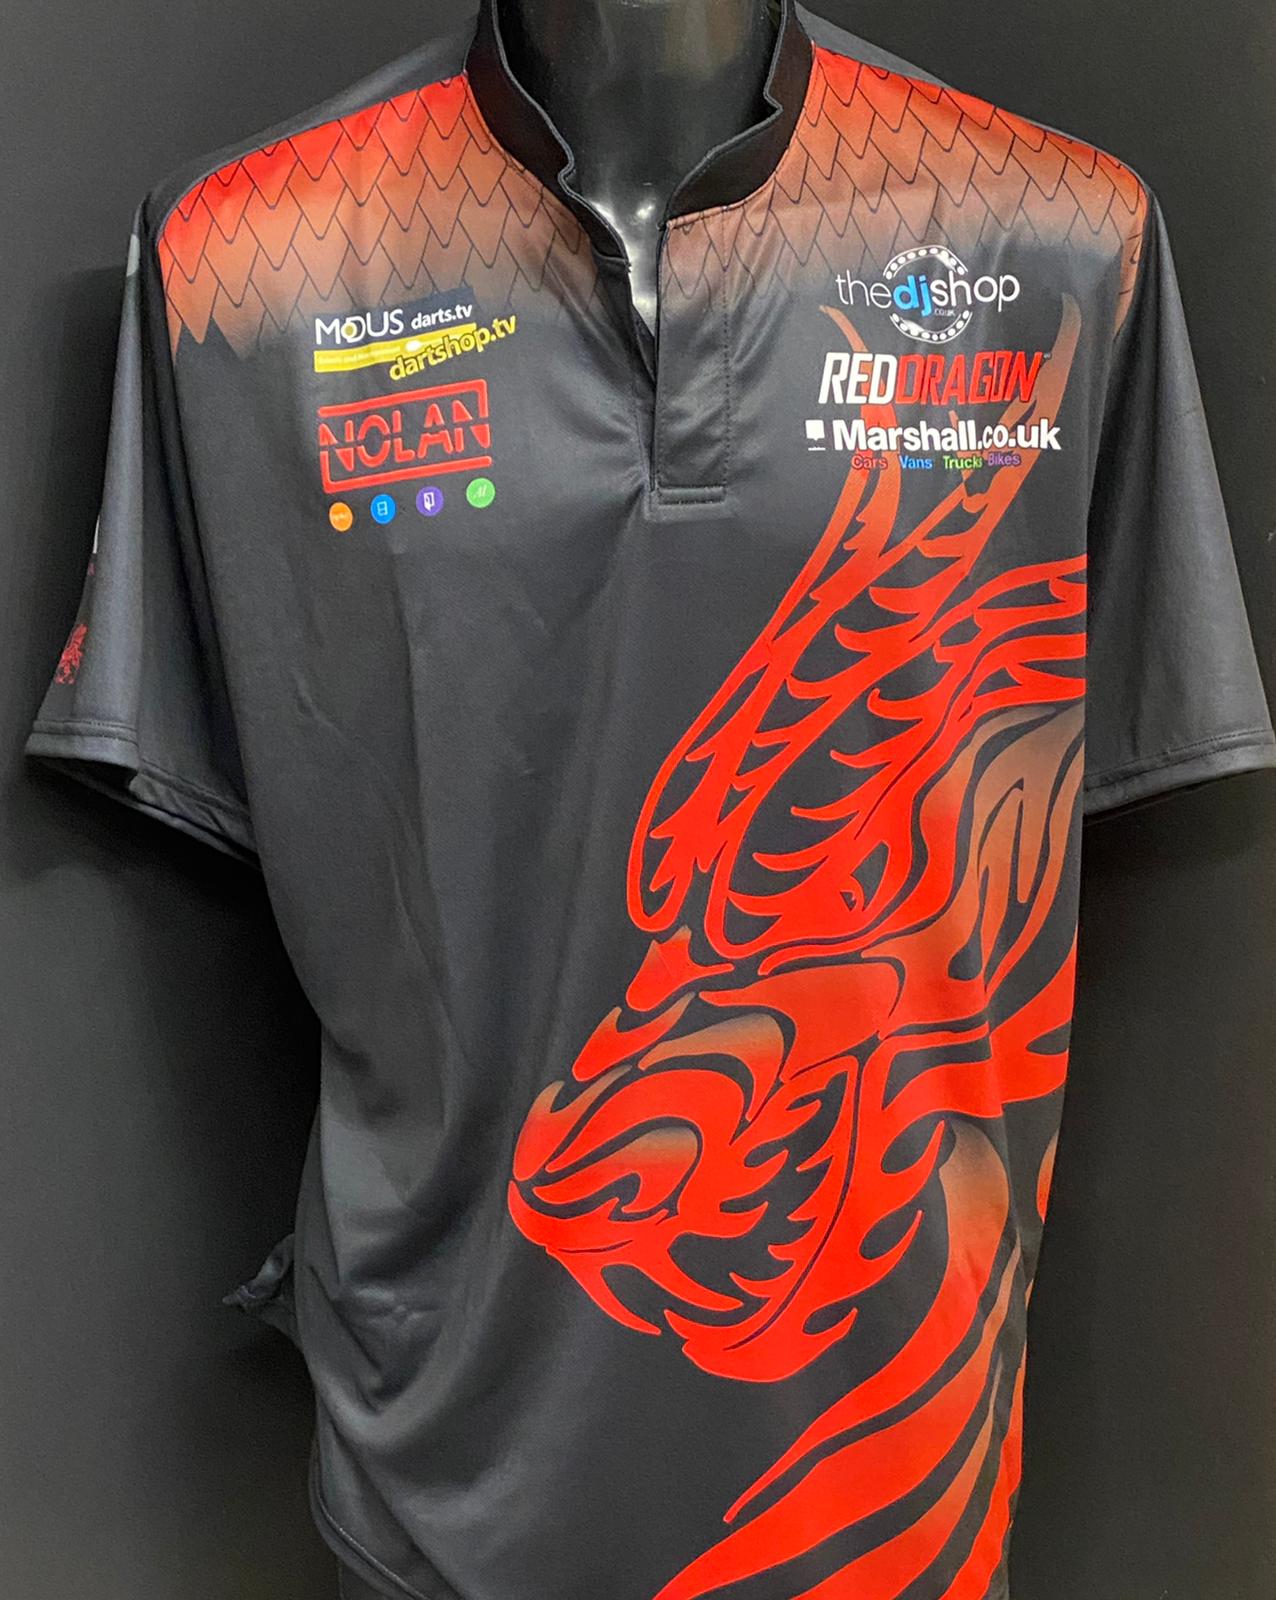 *CLAYTON BUNDLE* Official Replica Shirt plus Signed Ultimate Darts Card ...